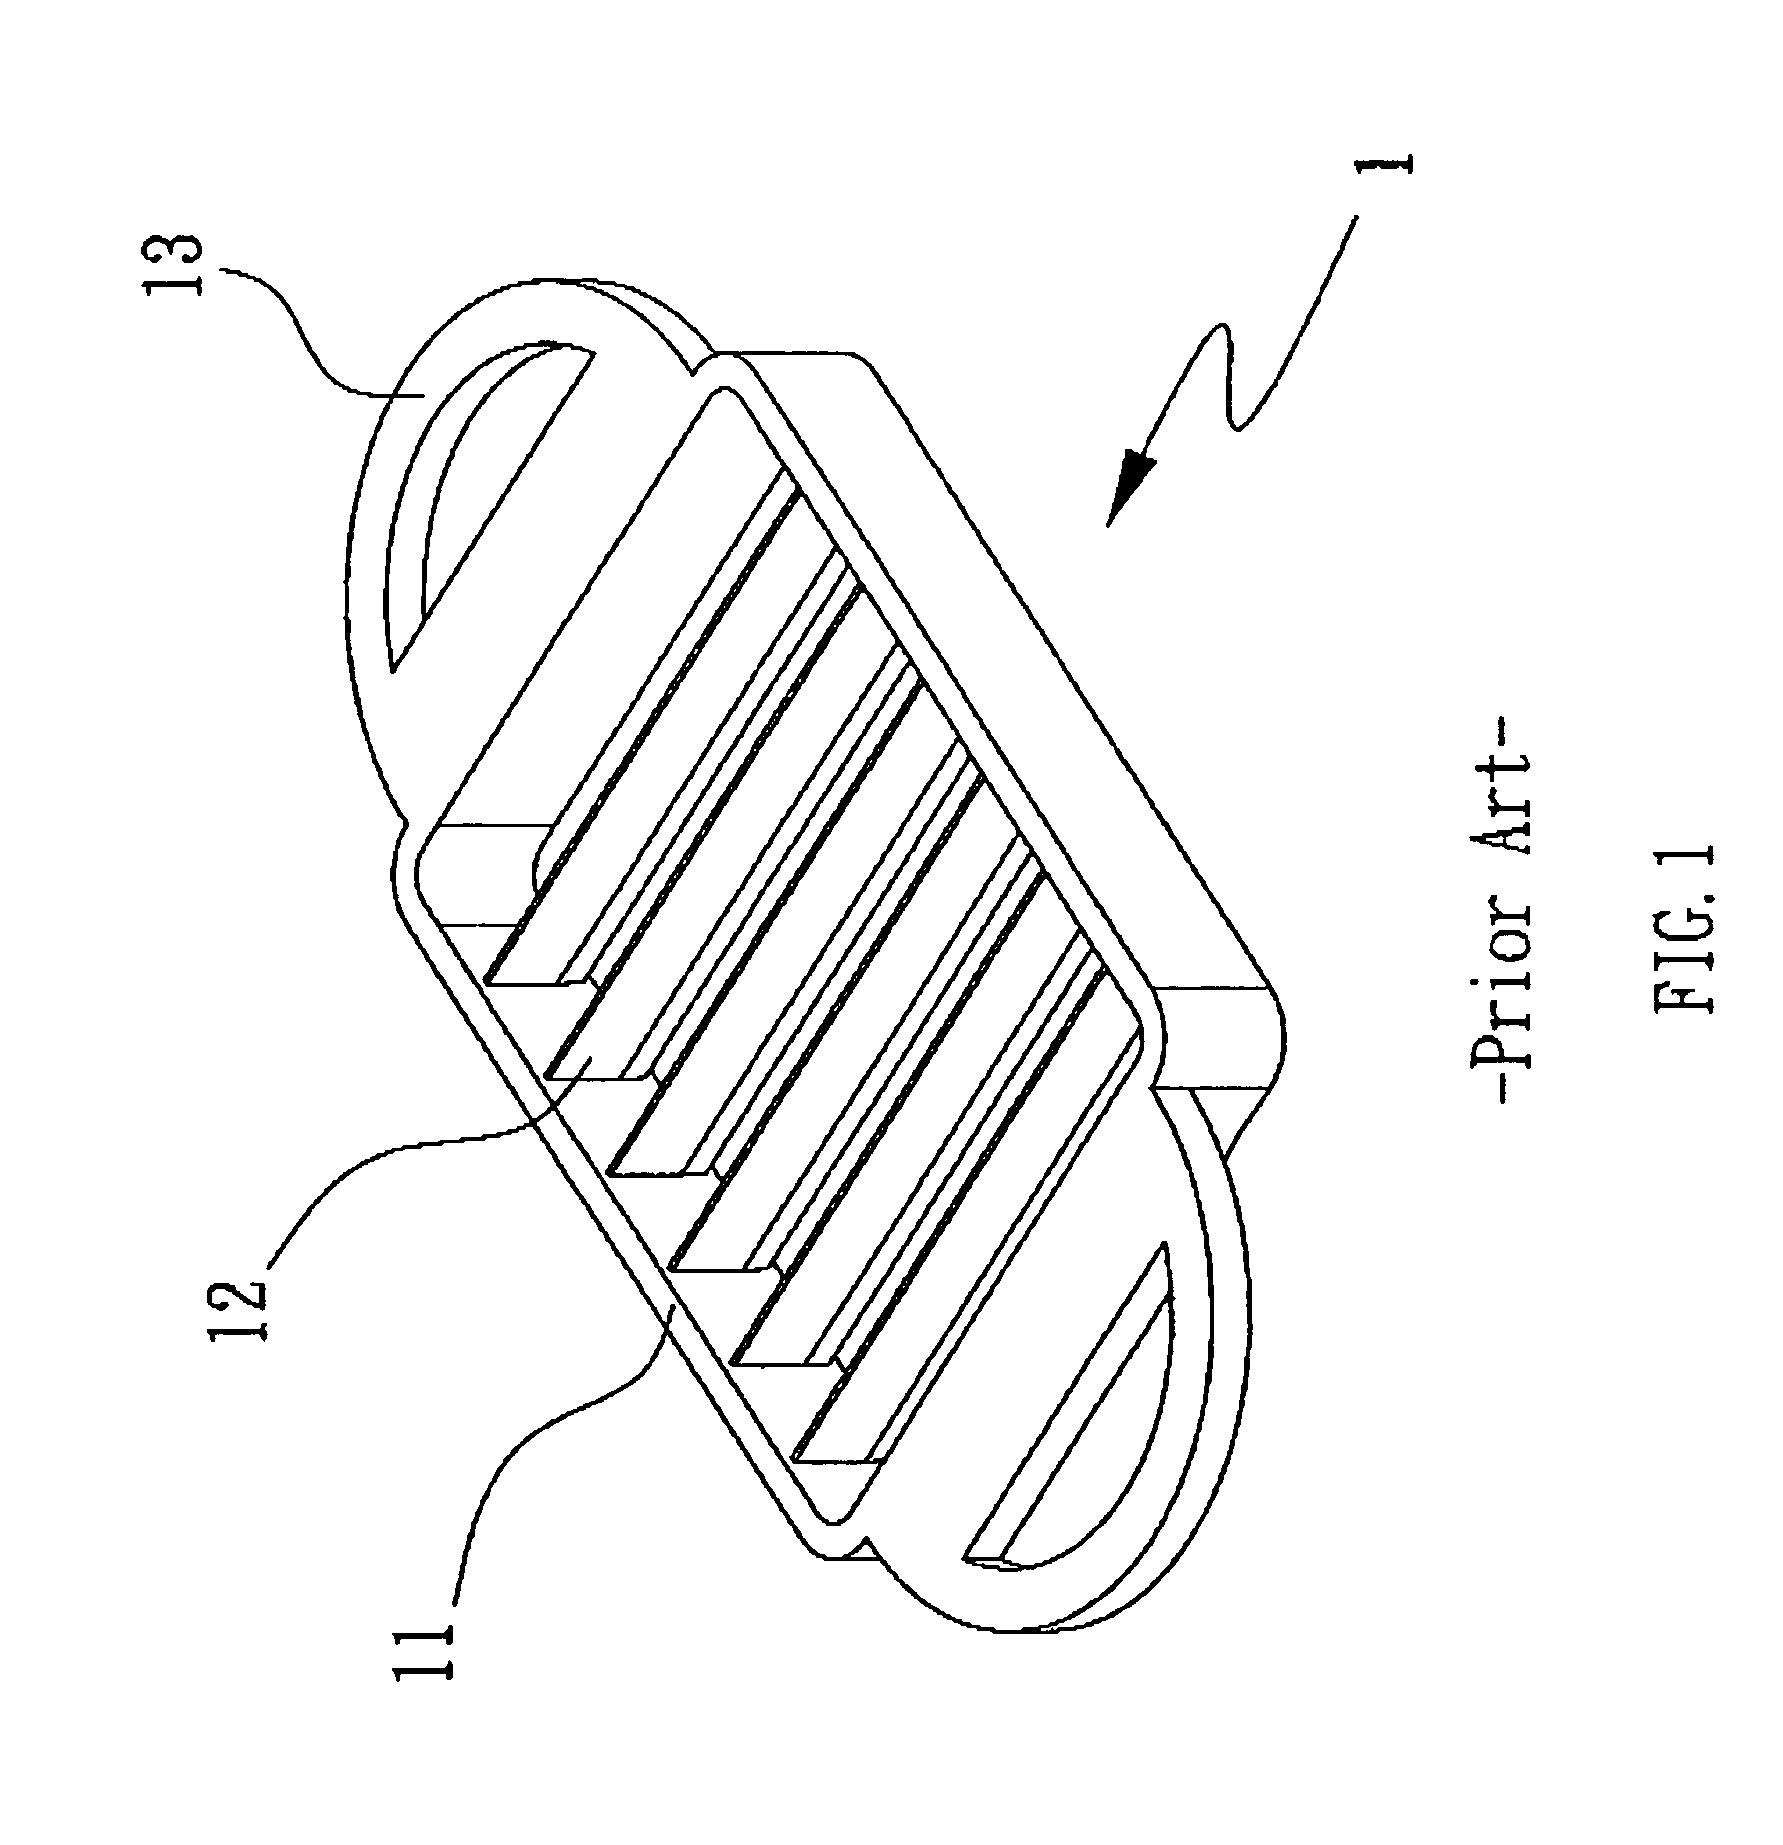 Fruit and vegetables slicing apparatus structure